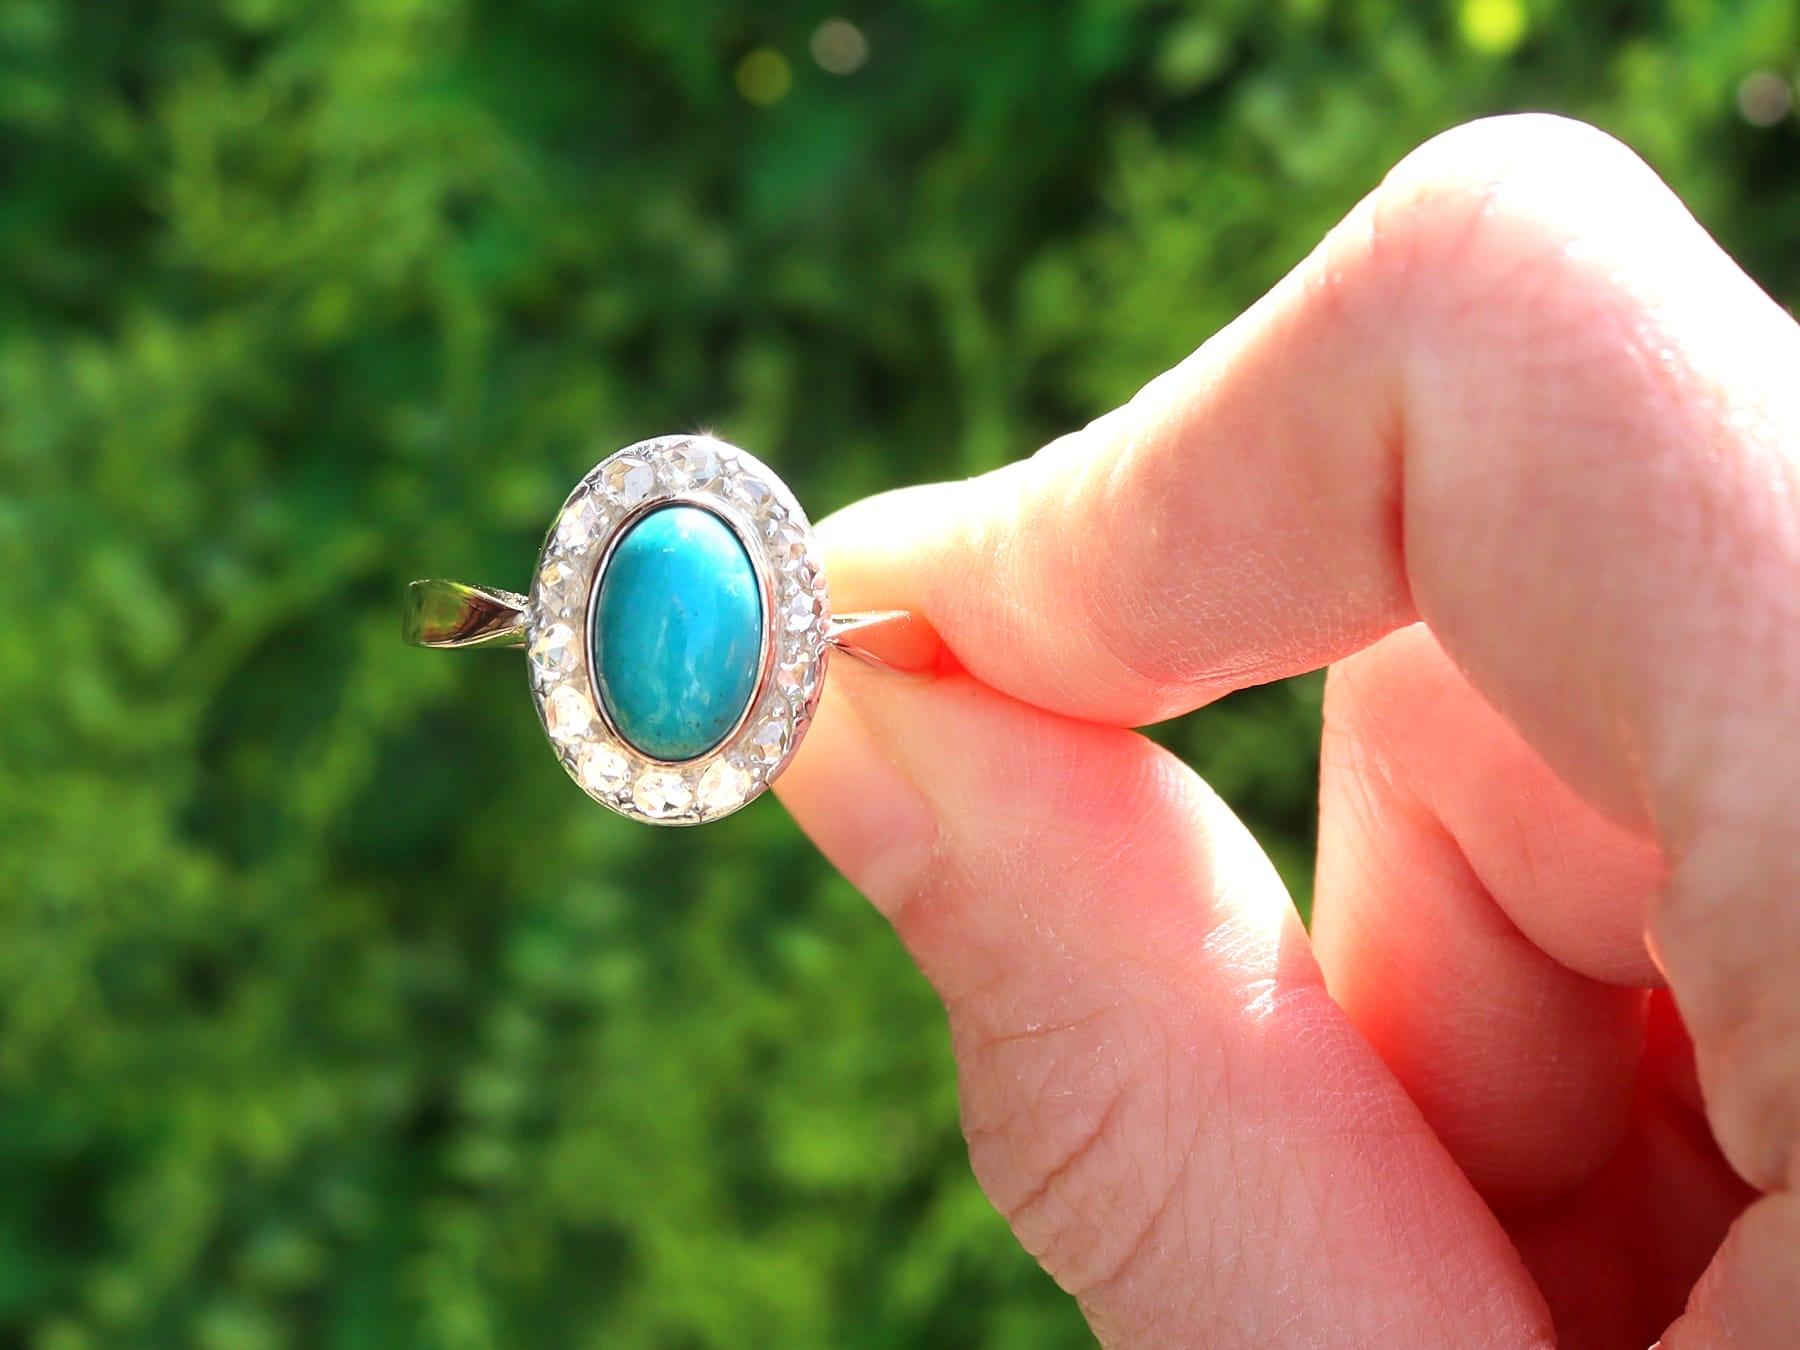 A fine and impressive antique 2.12 carat turquoise and 1.32 carat diamond, 14 karat rose gold and silver set dress ring; part of our diverse antique jewellery and estate jewelry collections

This fine and impressive antique turquoise ring has been